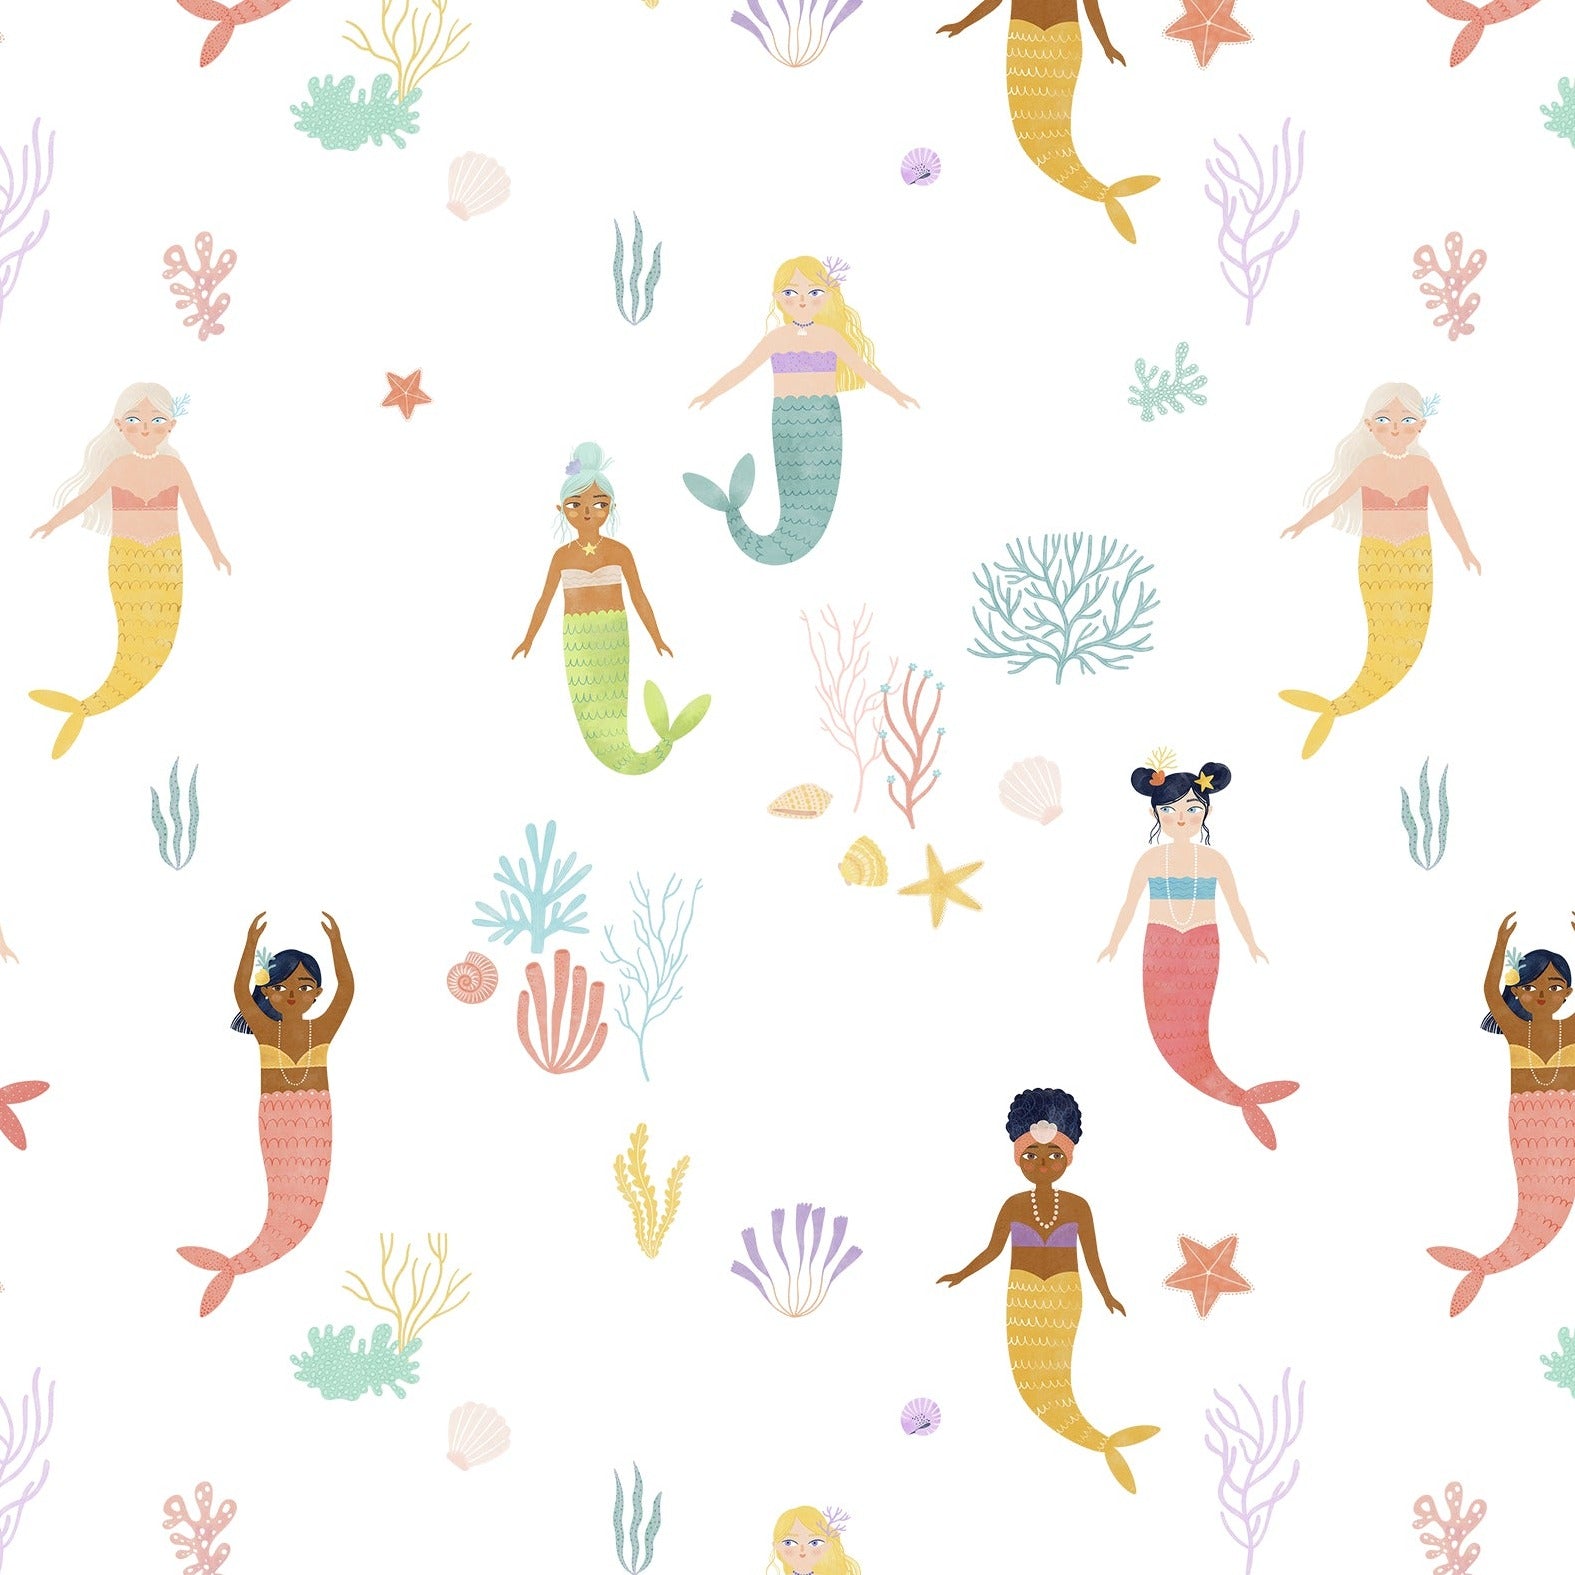 Detailed close-up of the Little Mermaids Wallpaper showcasing a colorful array of mermaids with diverse appearances and attire, set among oceanic plants and animals. This vibrant and inclusive design makes it perfect for adding a fantastical touch to any child's room